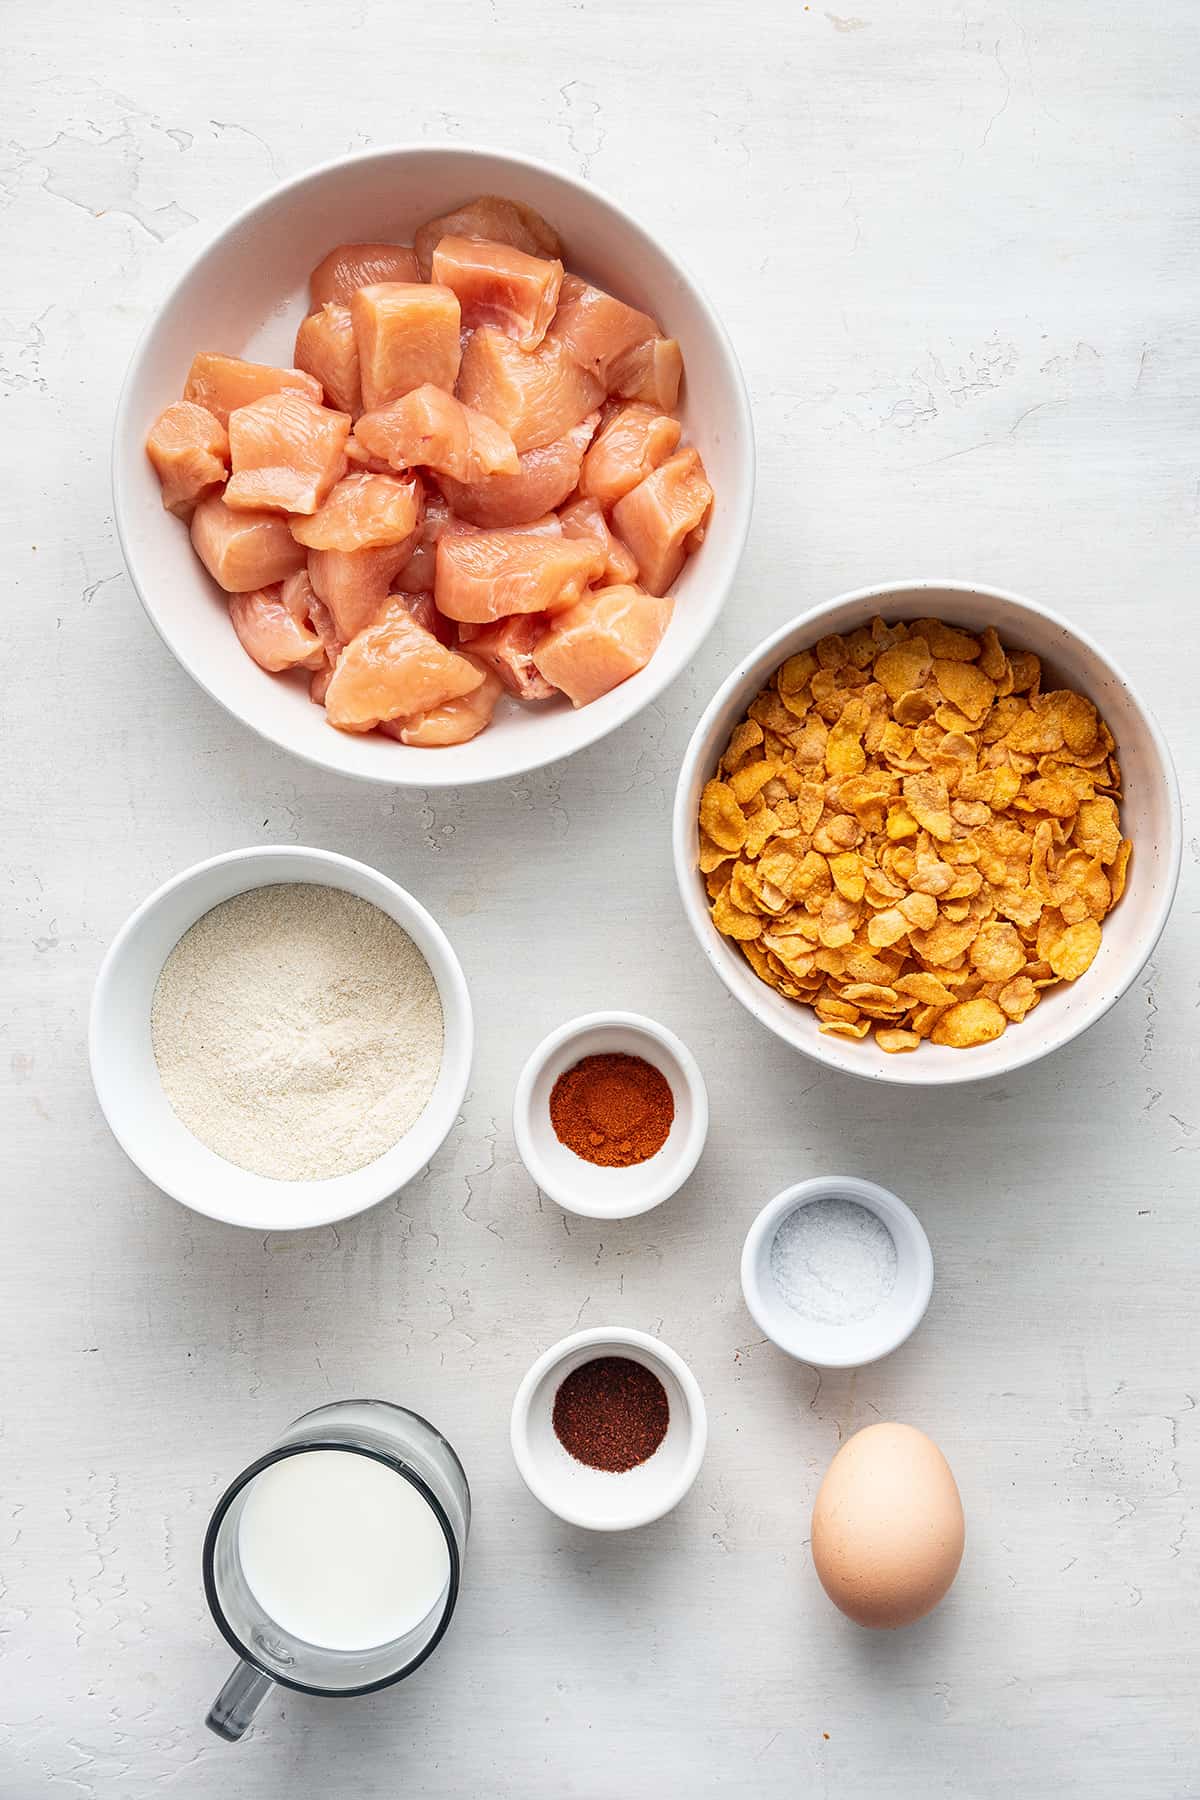 Overhead view of a bowl of uncooked chicken breast chunks, a bowl of corn flakes, a bowl of coconut flour, a bowl of paprika, a bowl of chili powder, a bowl of salt, a pitcher of dairy-free milk, and an egg